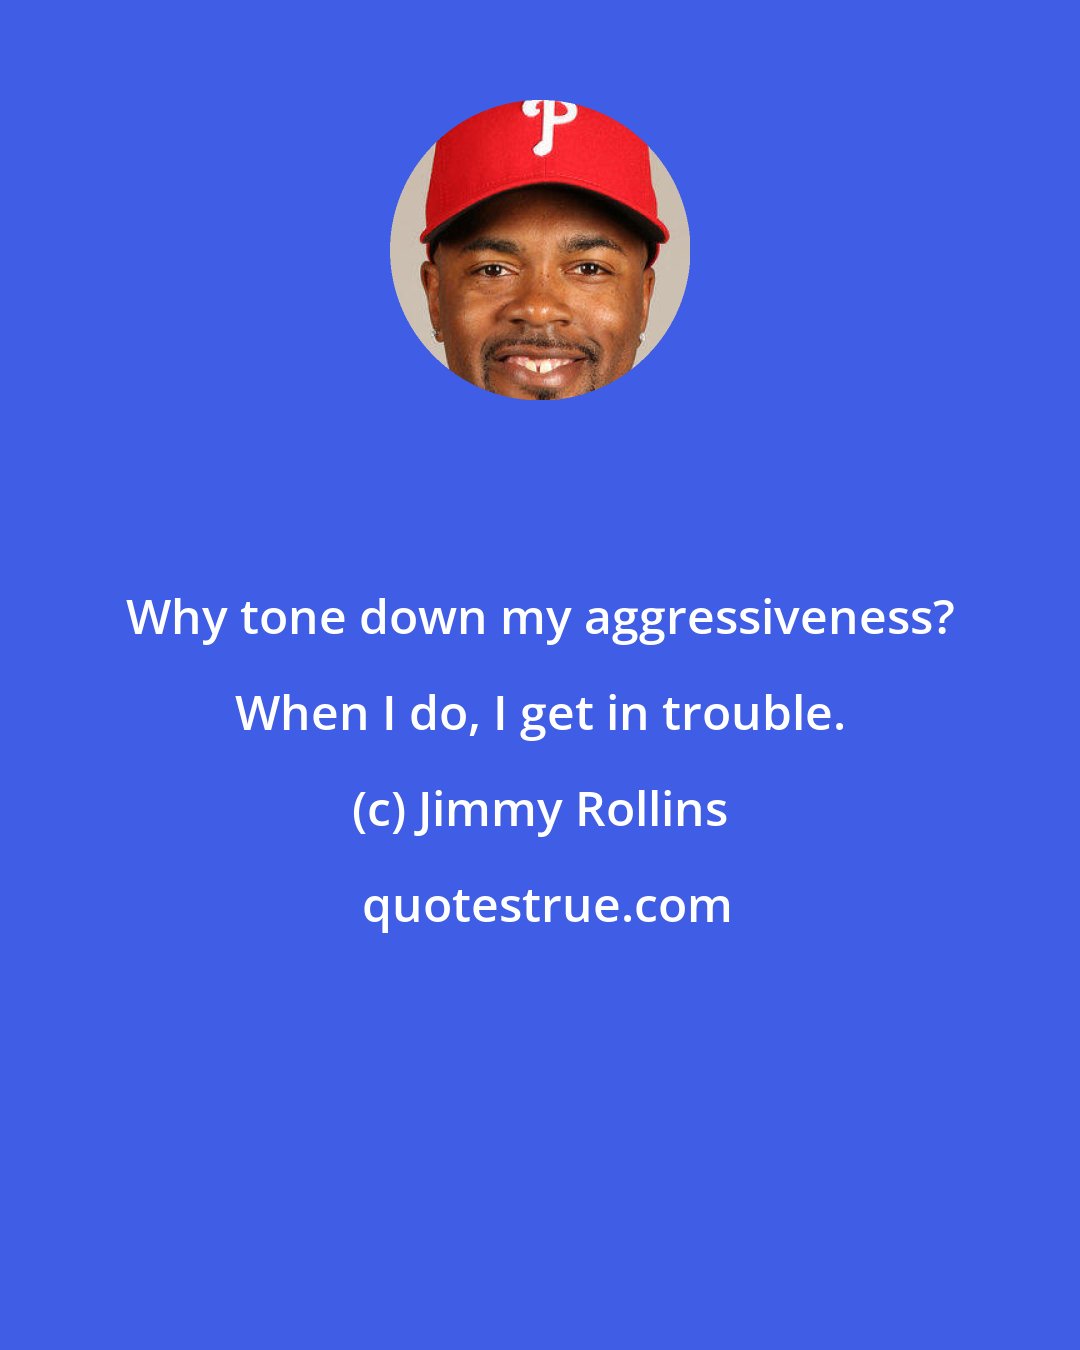 Jimmy Rollins: Why tone down my aggressiveness? When I do, I get in trouble.